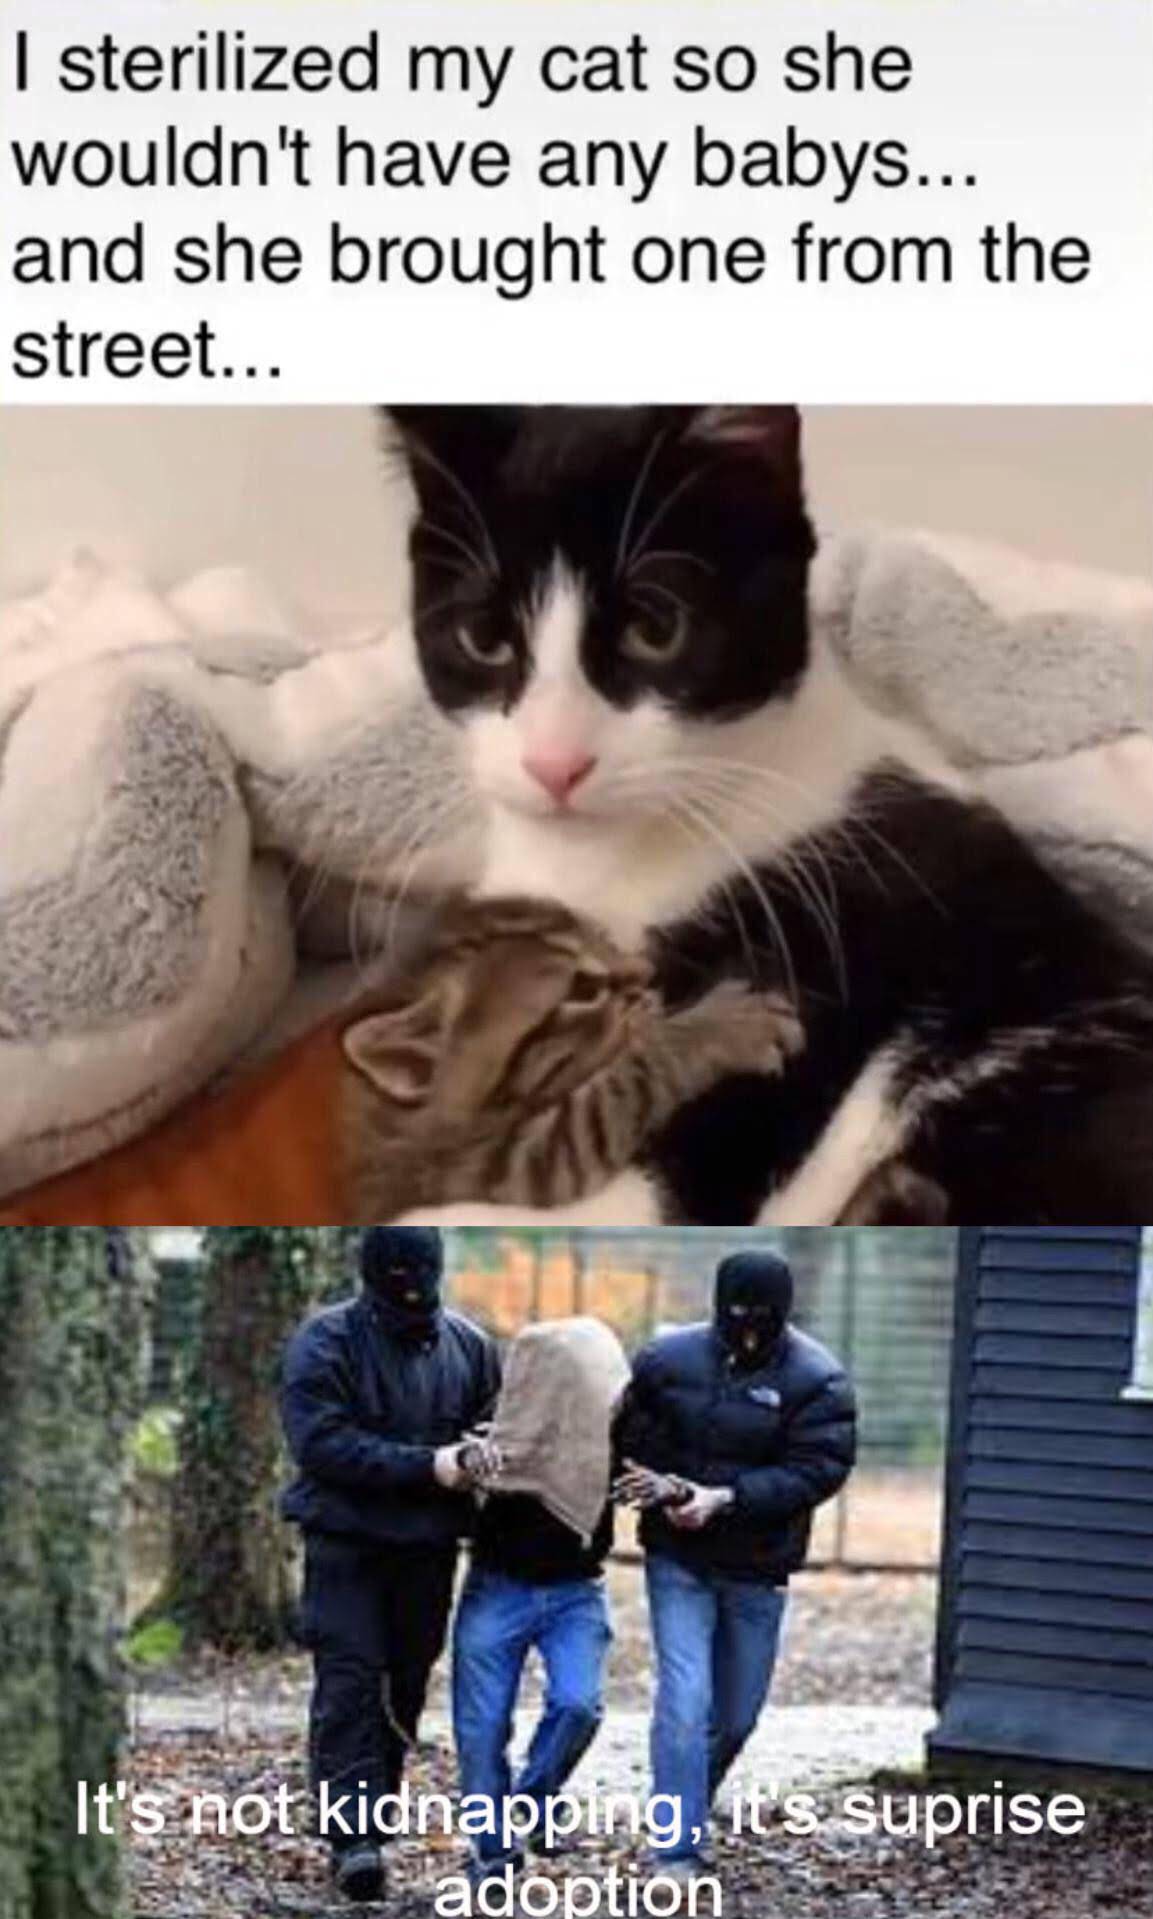 dank memes - I sterilized my cat so she wouldn't have any babys... and she brought one from the street... It's not kidnapping, it's suprise adoption